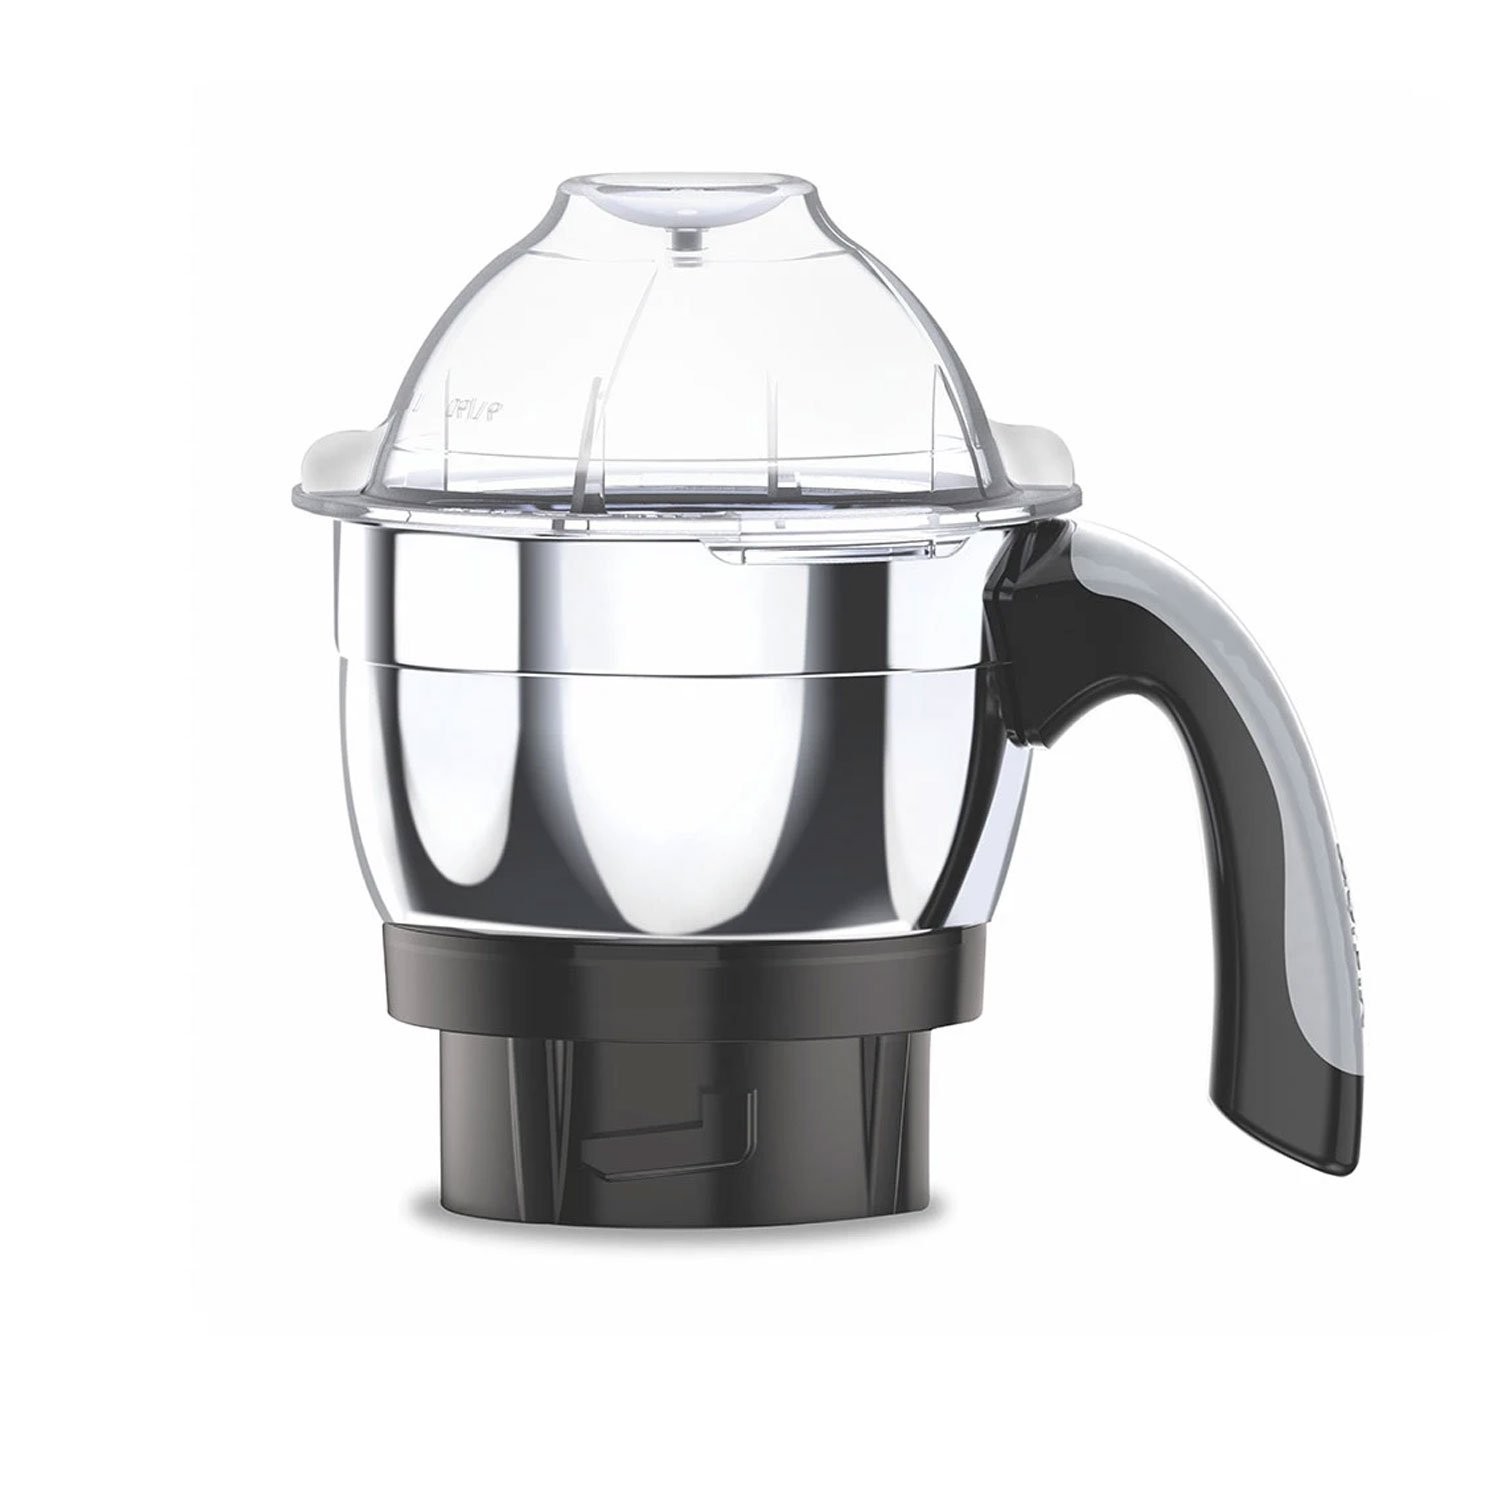 vidiem-eva-nero-650w-stainless-steel-jars-indian-mixer-grinder-spice-coffee-grinder-110v-for-use-in-canada-usa3